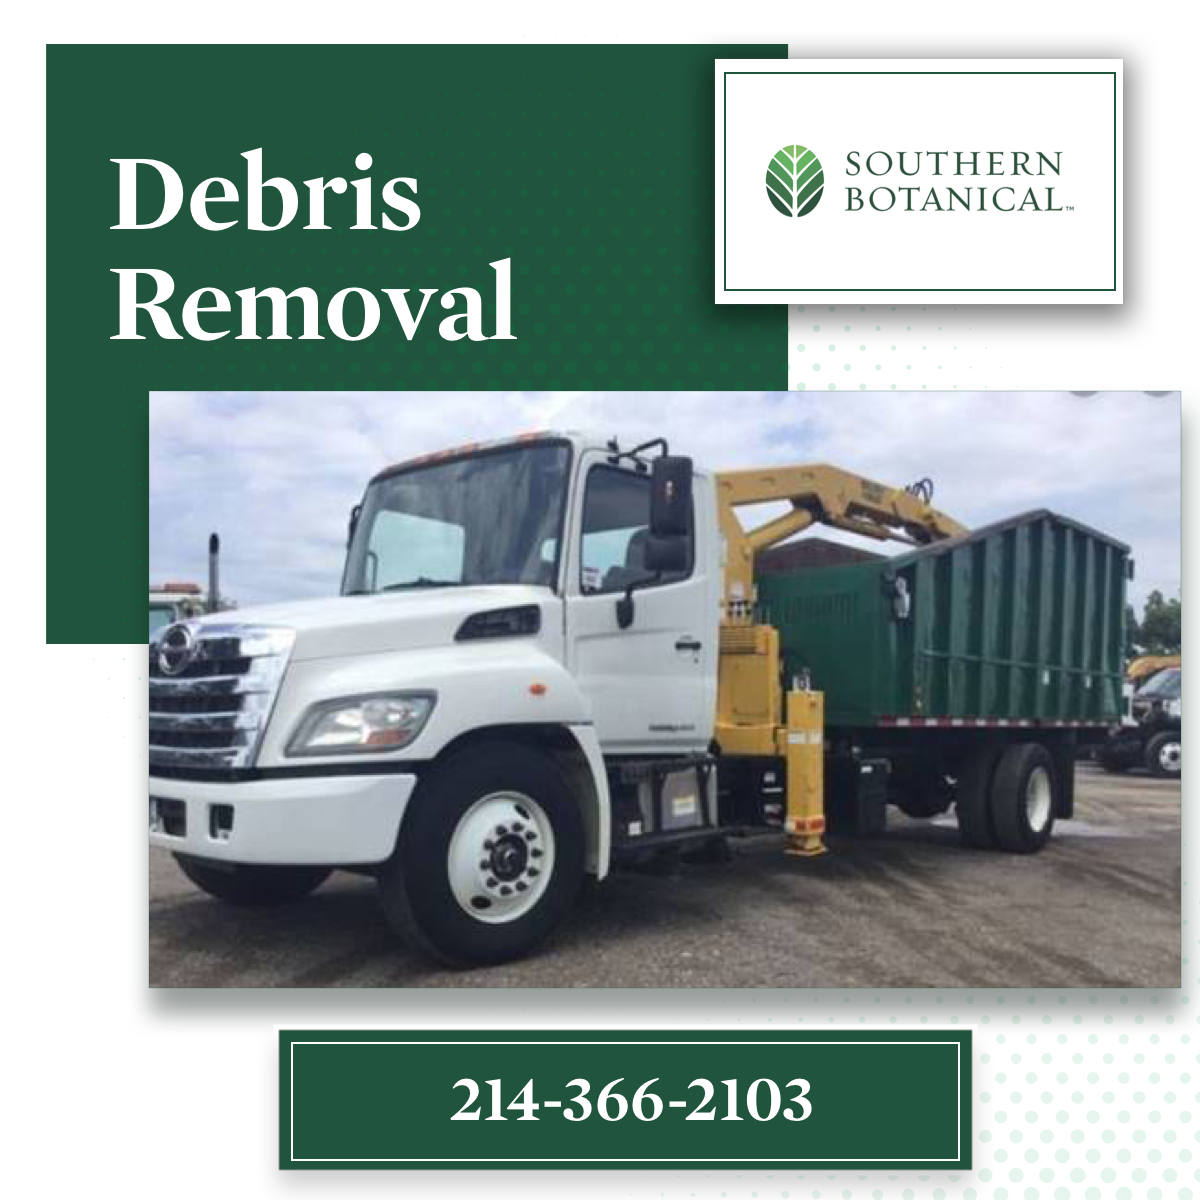 Professional Storm Cleanup Services | Debris Removal | Dallas Tree Care Services